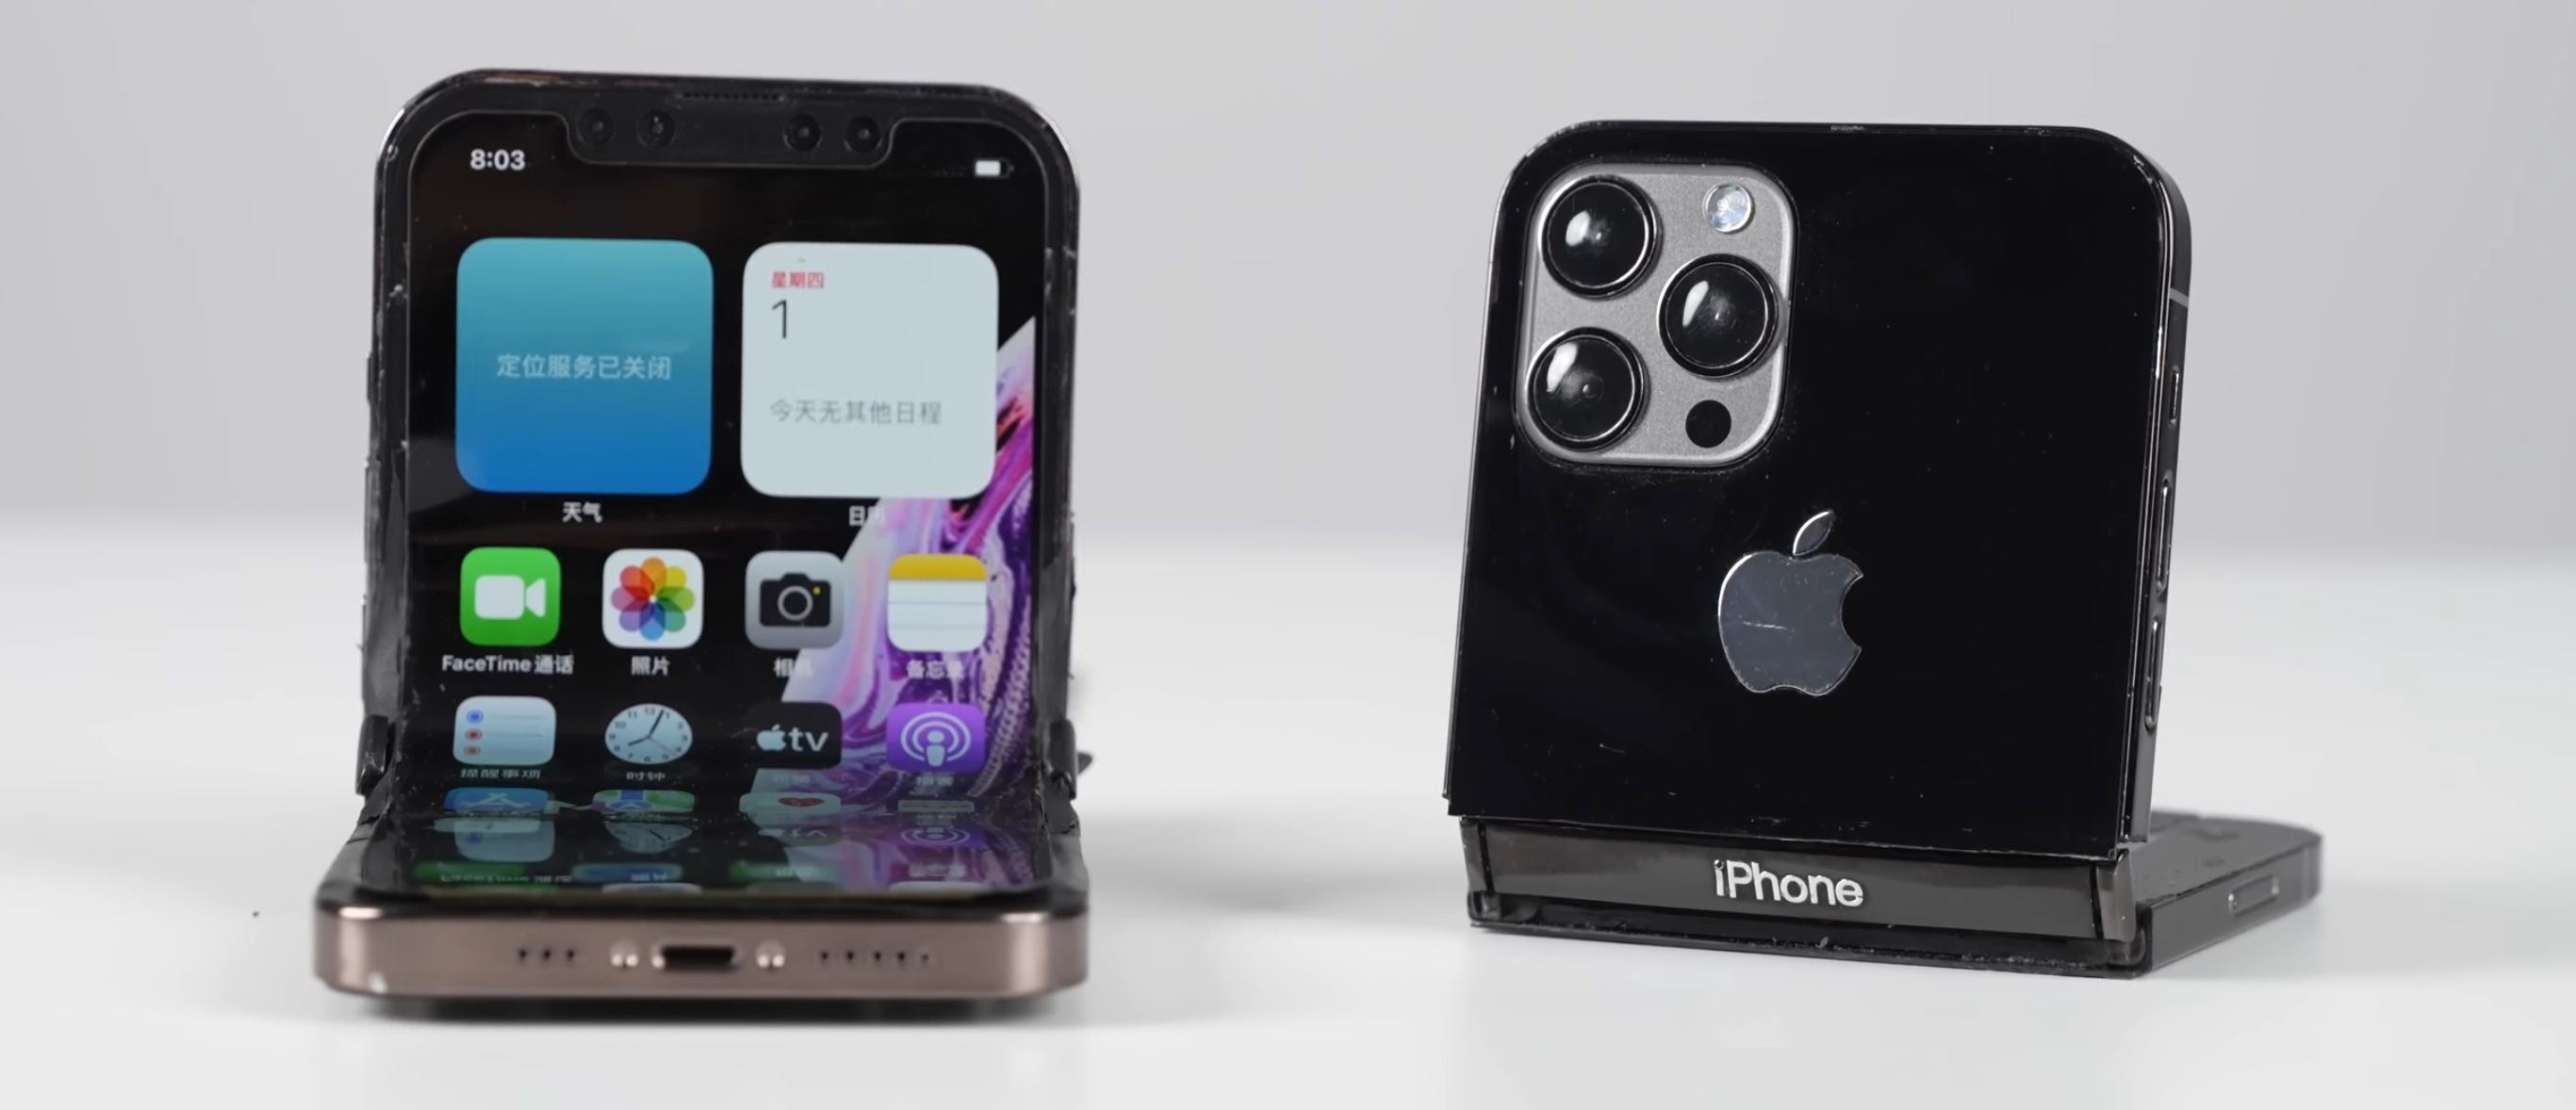 Meet the world's first foldable iPhone